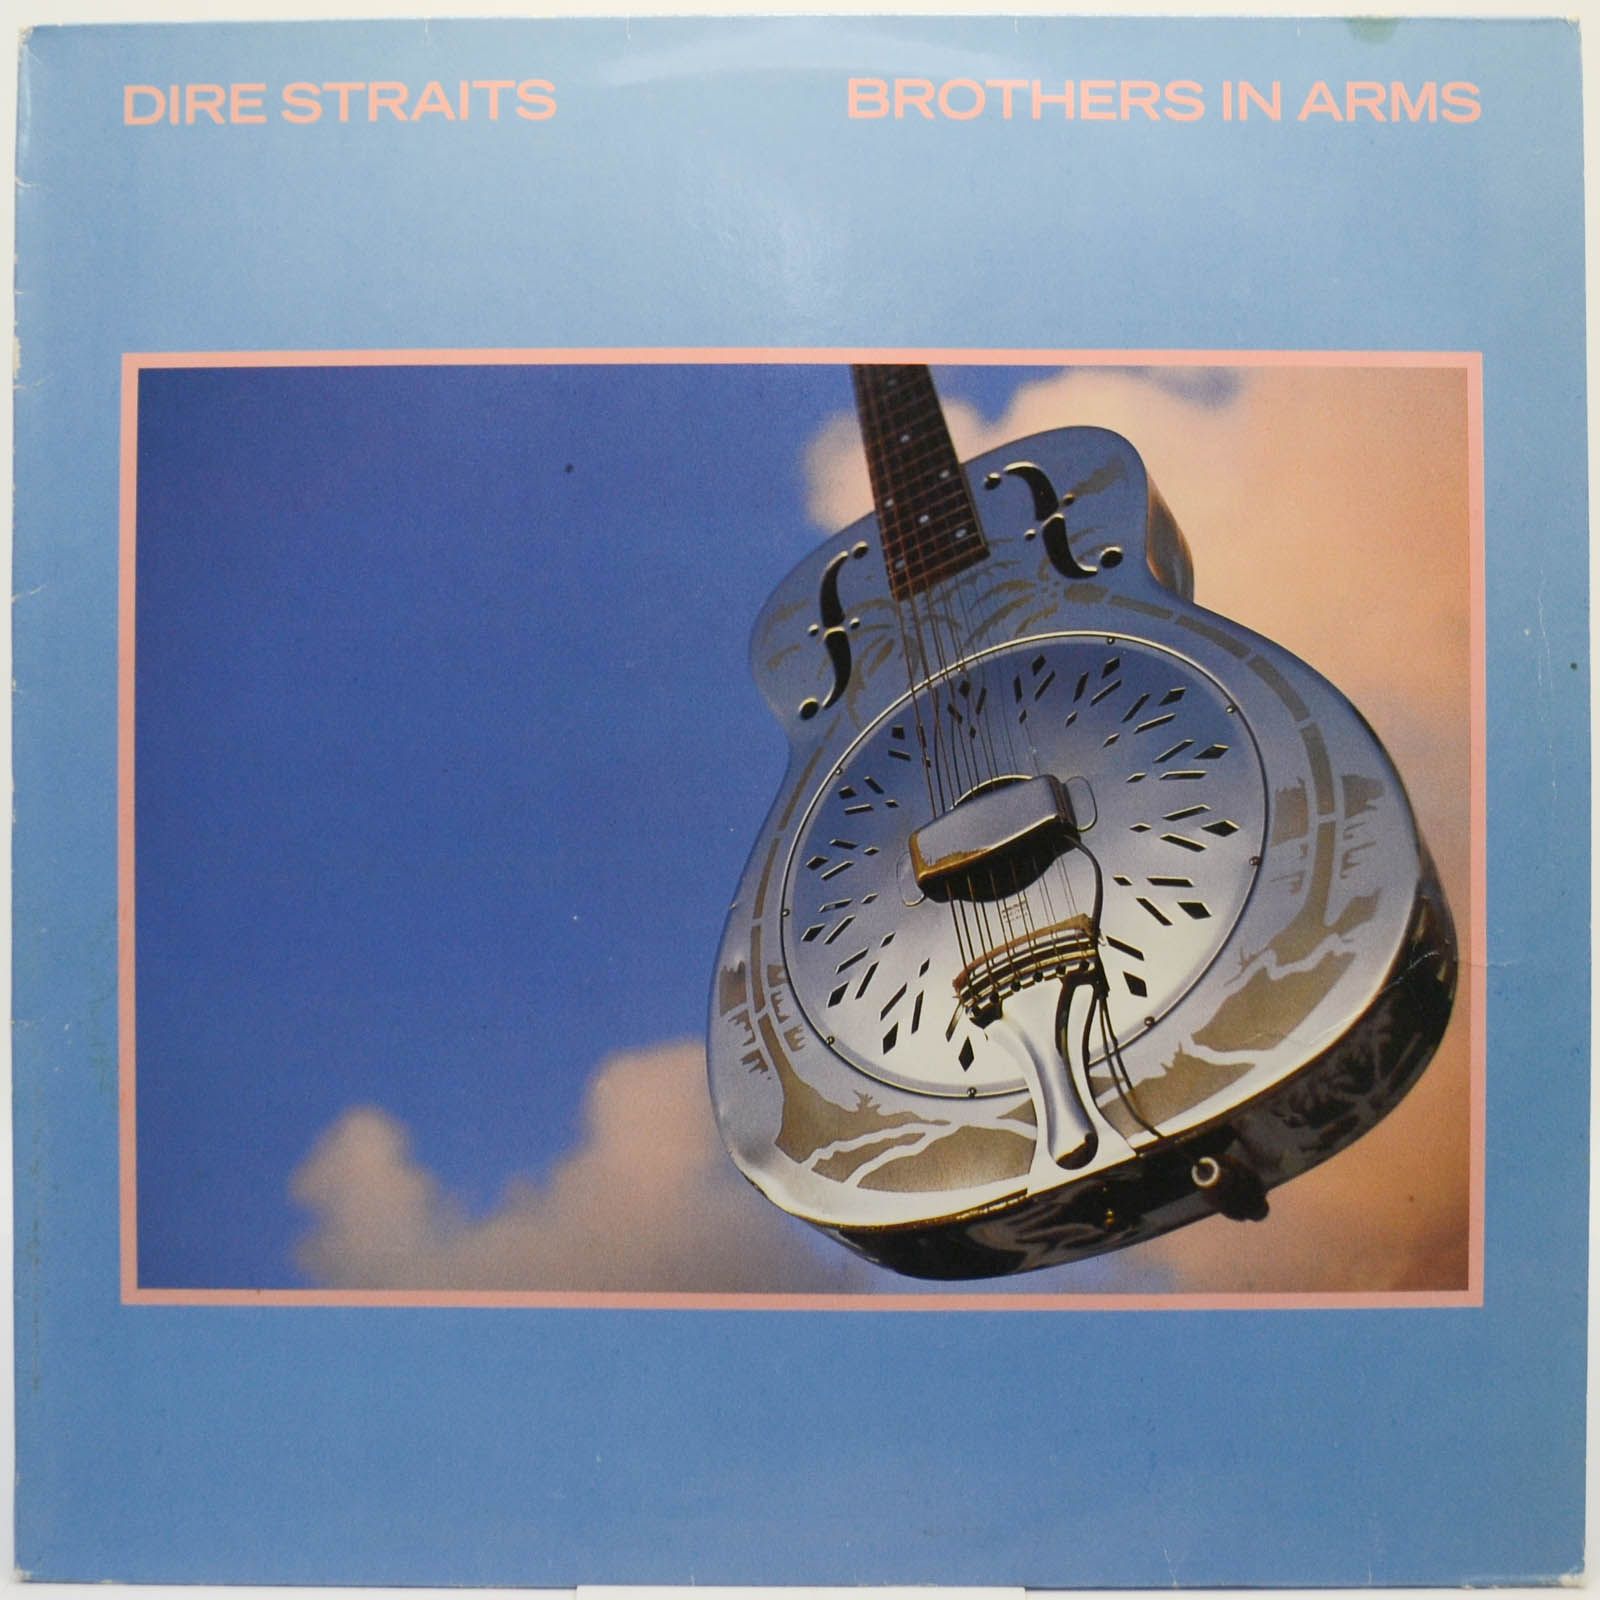 Dire Straits — Brothers In Arms, 1985